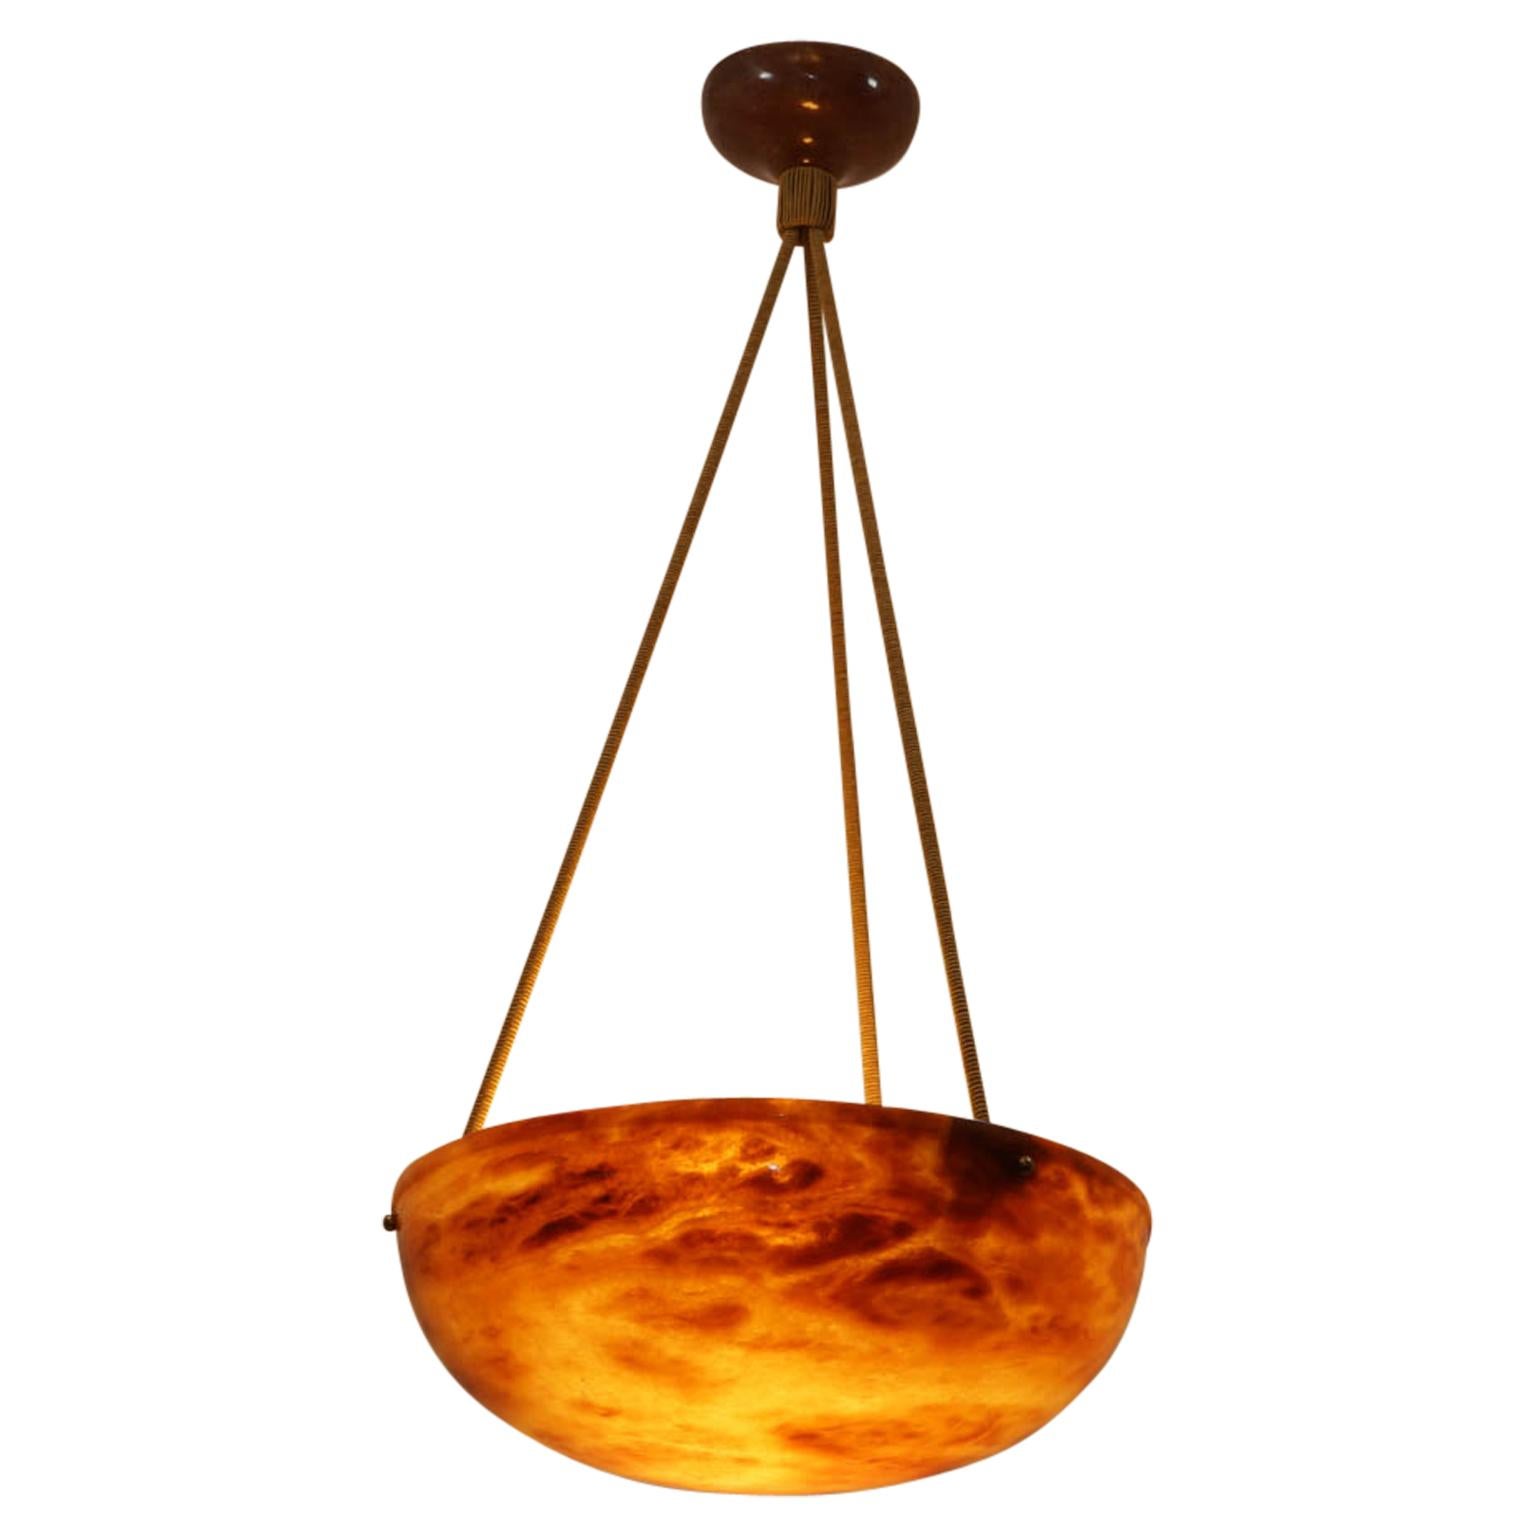 Carved from a choice piece of light amber alabaster with a simple single upper rim, the fixture is suspended on a set of three electrified silk ropes, holding three 40 watt incandescent bulbs, or higher wattage LED bulbs.